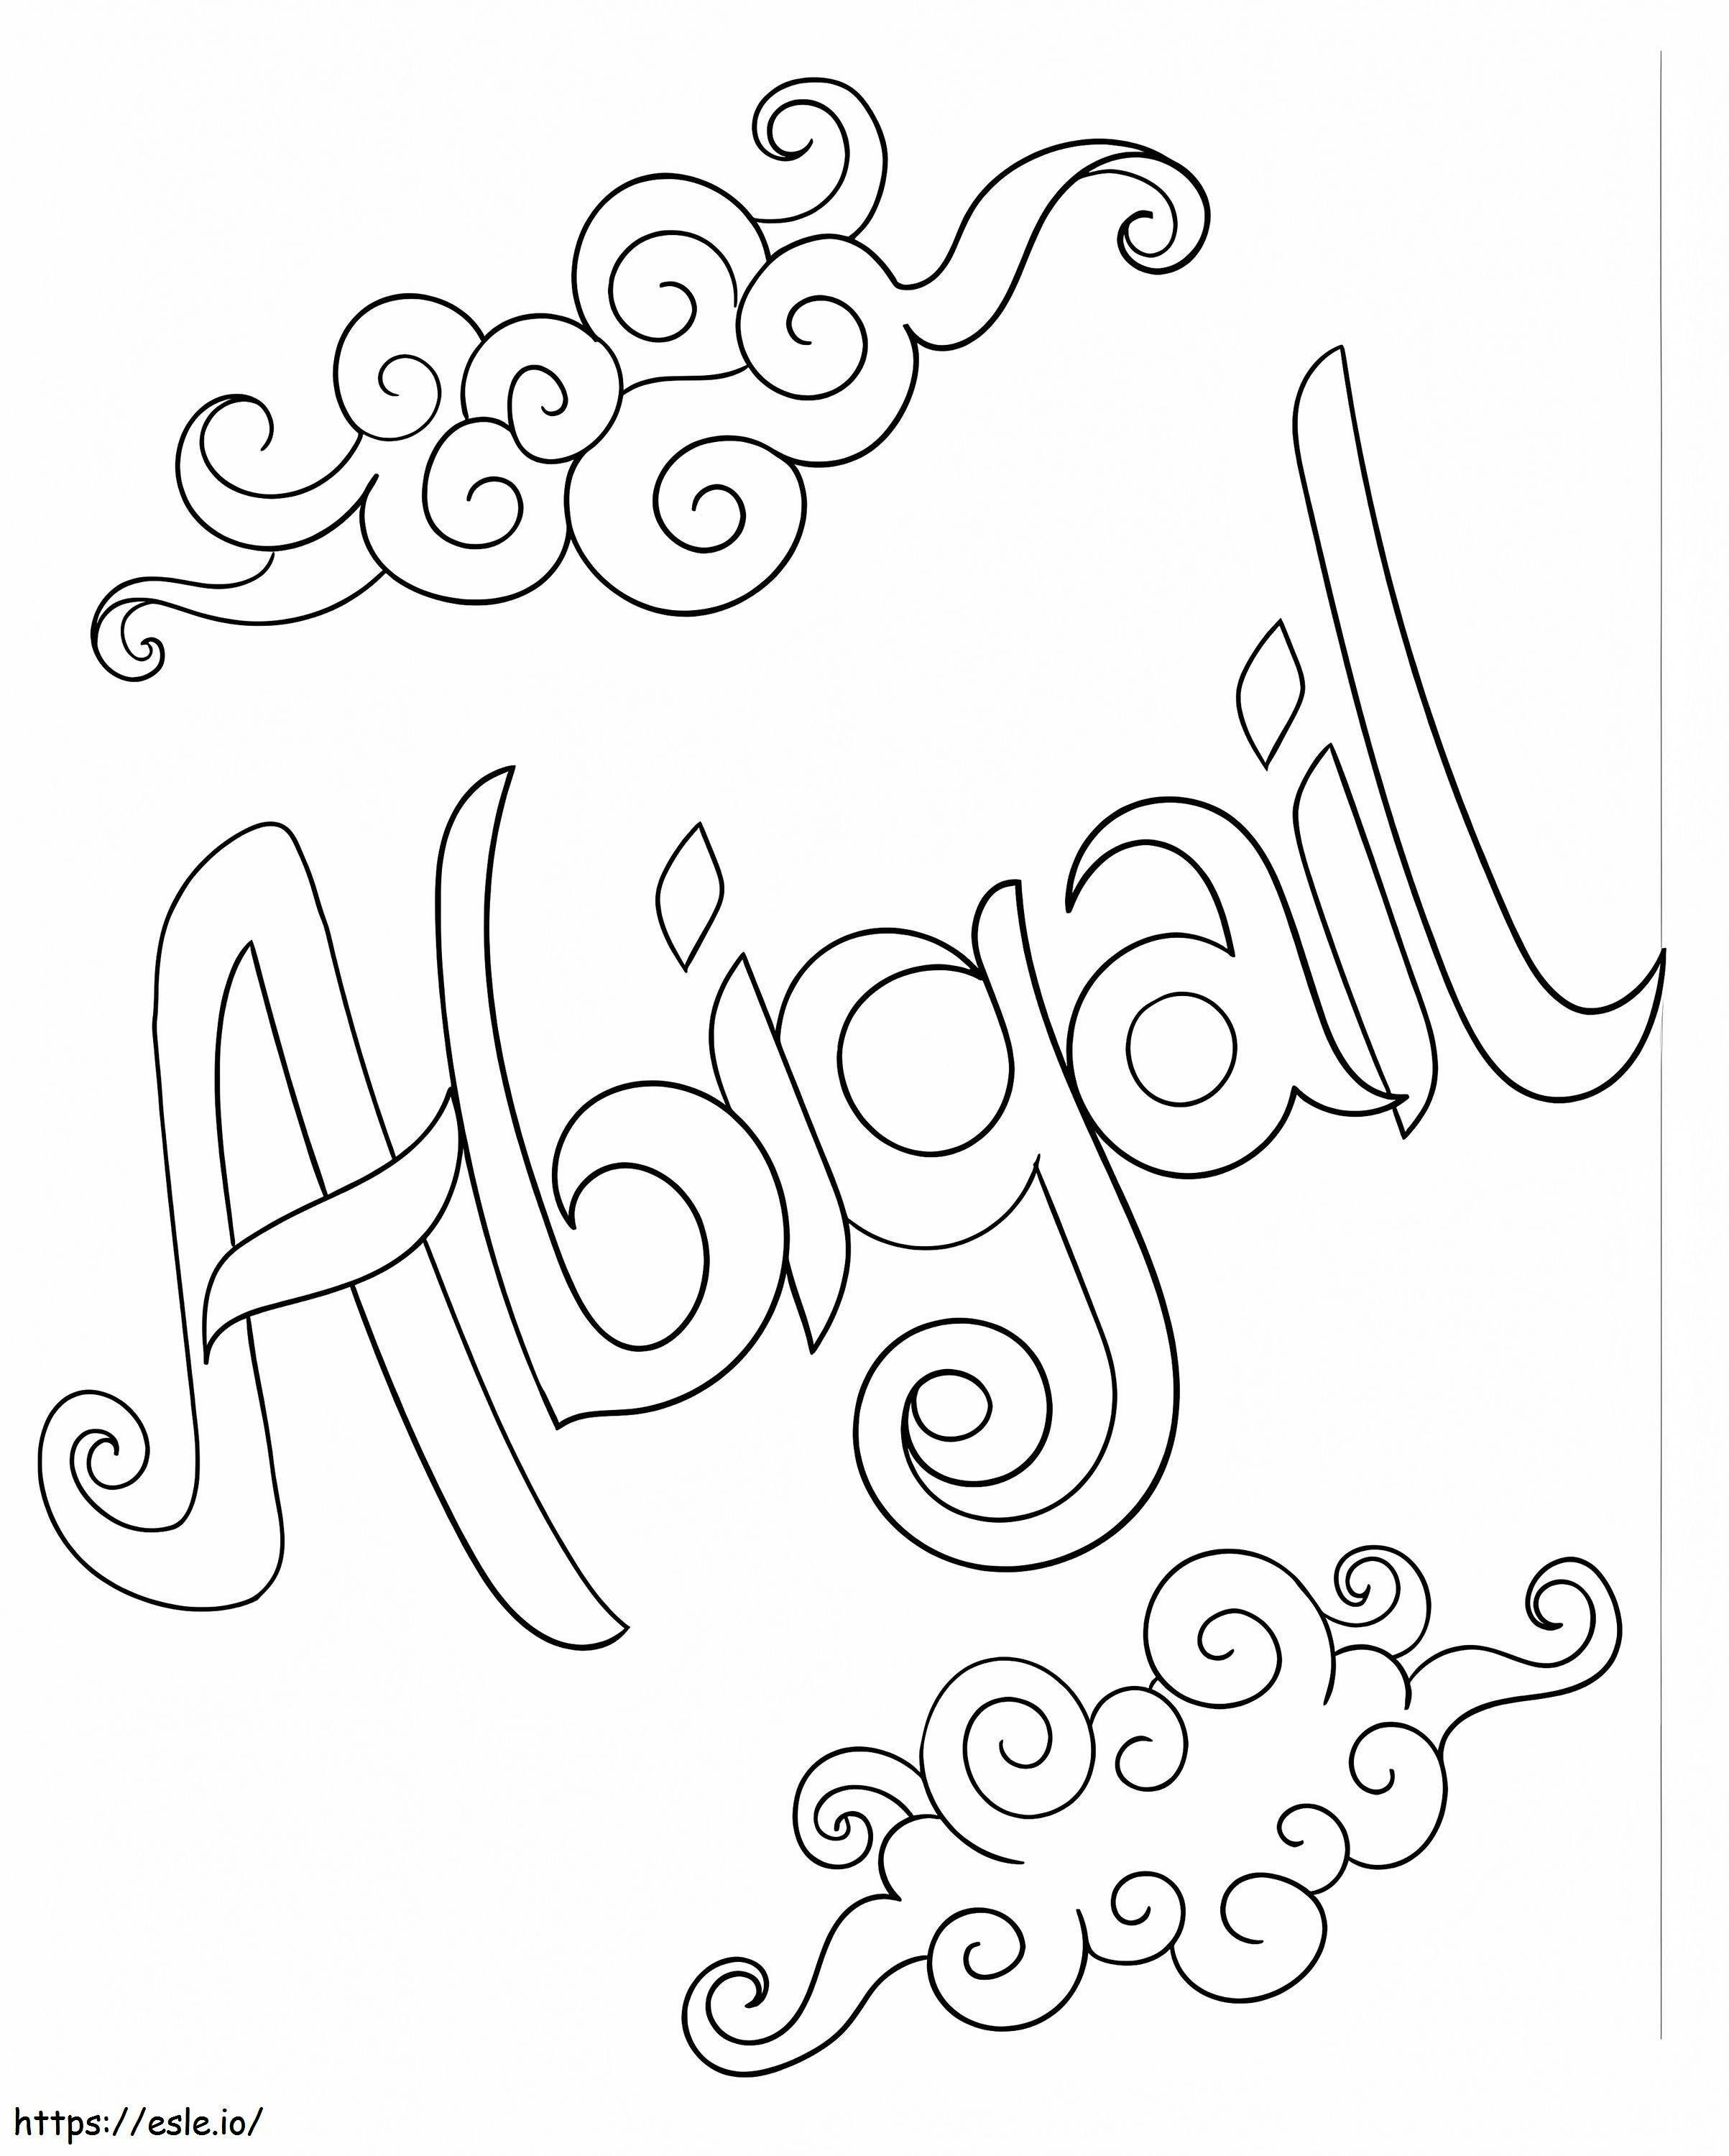 Printable Abigail coloring page